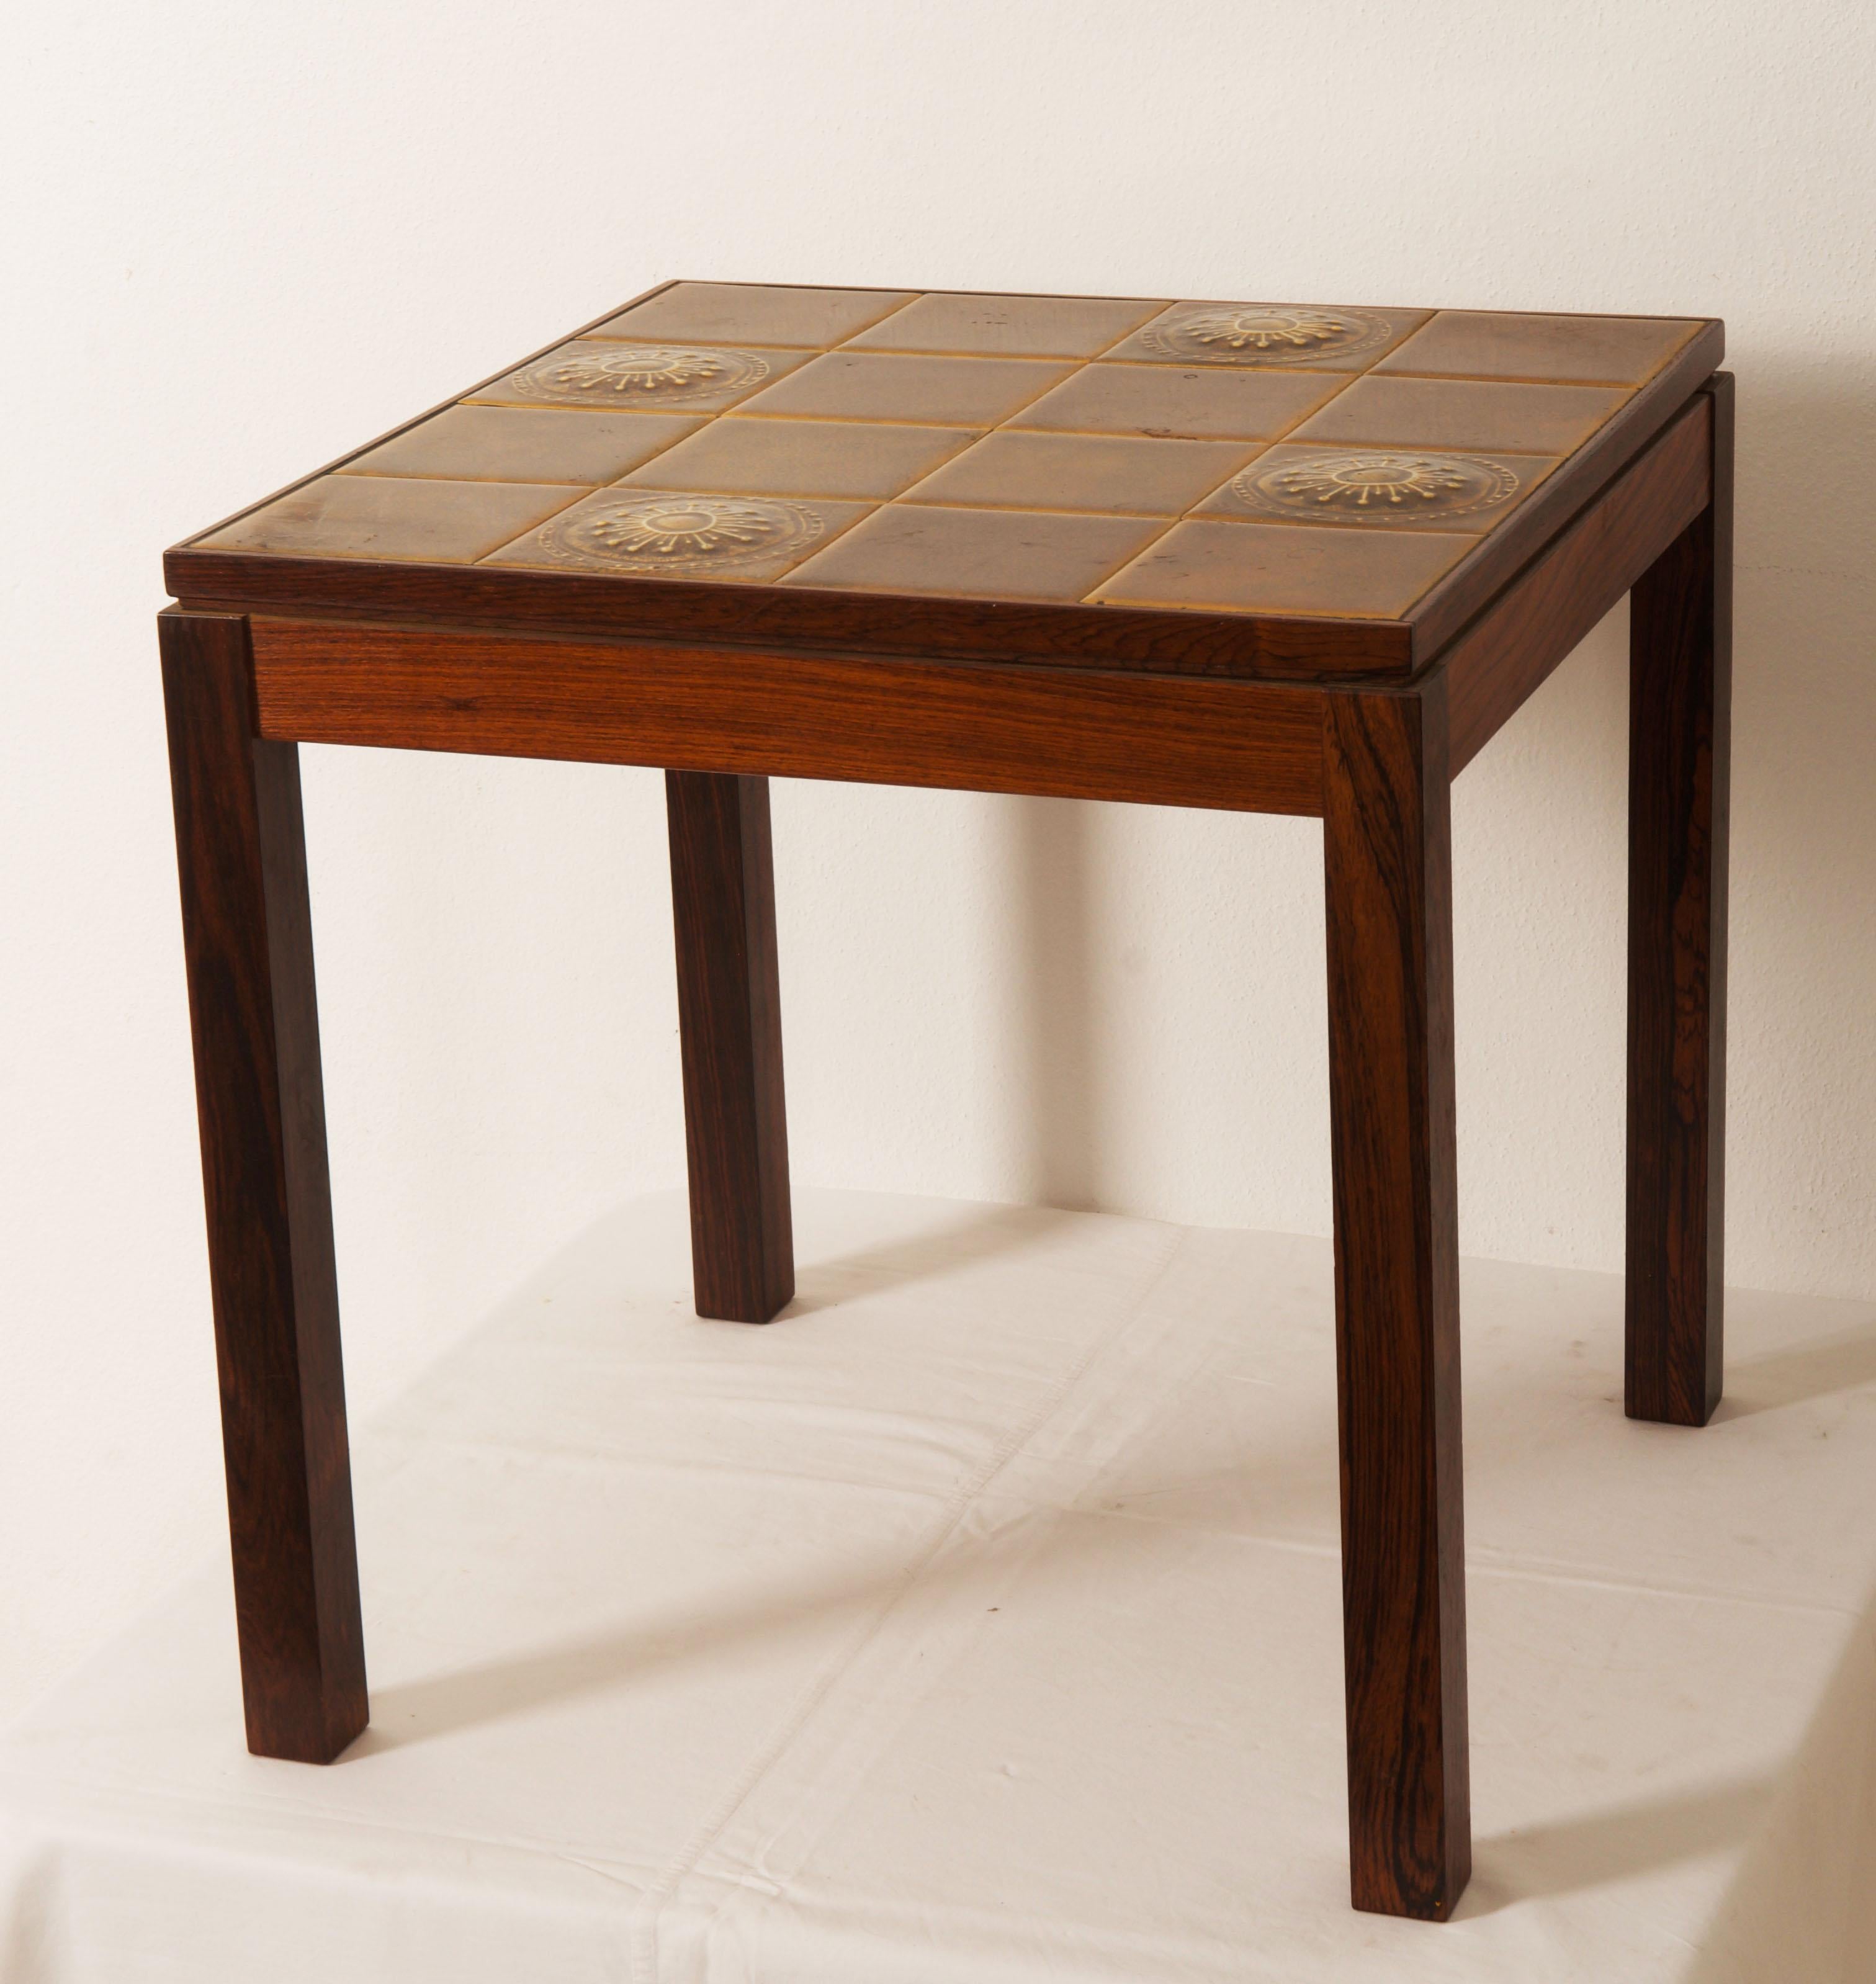 A pair of hardwood tables with a decorative tiled top. Made in Denmark in the 1960s.